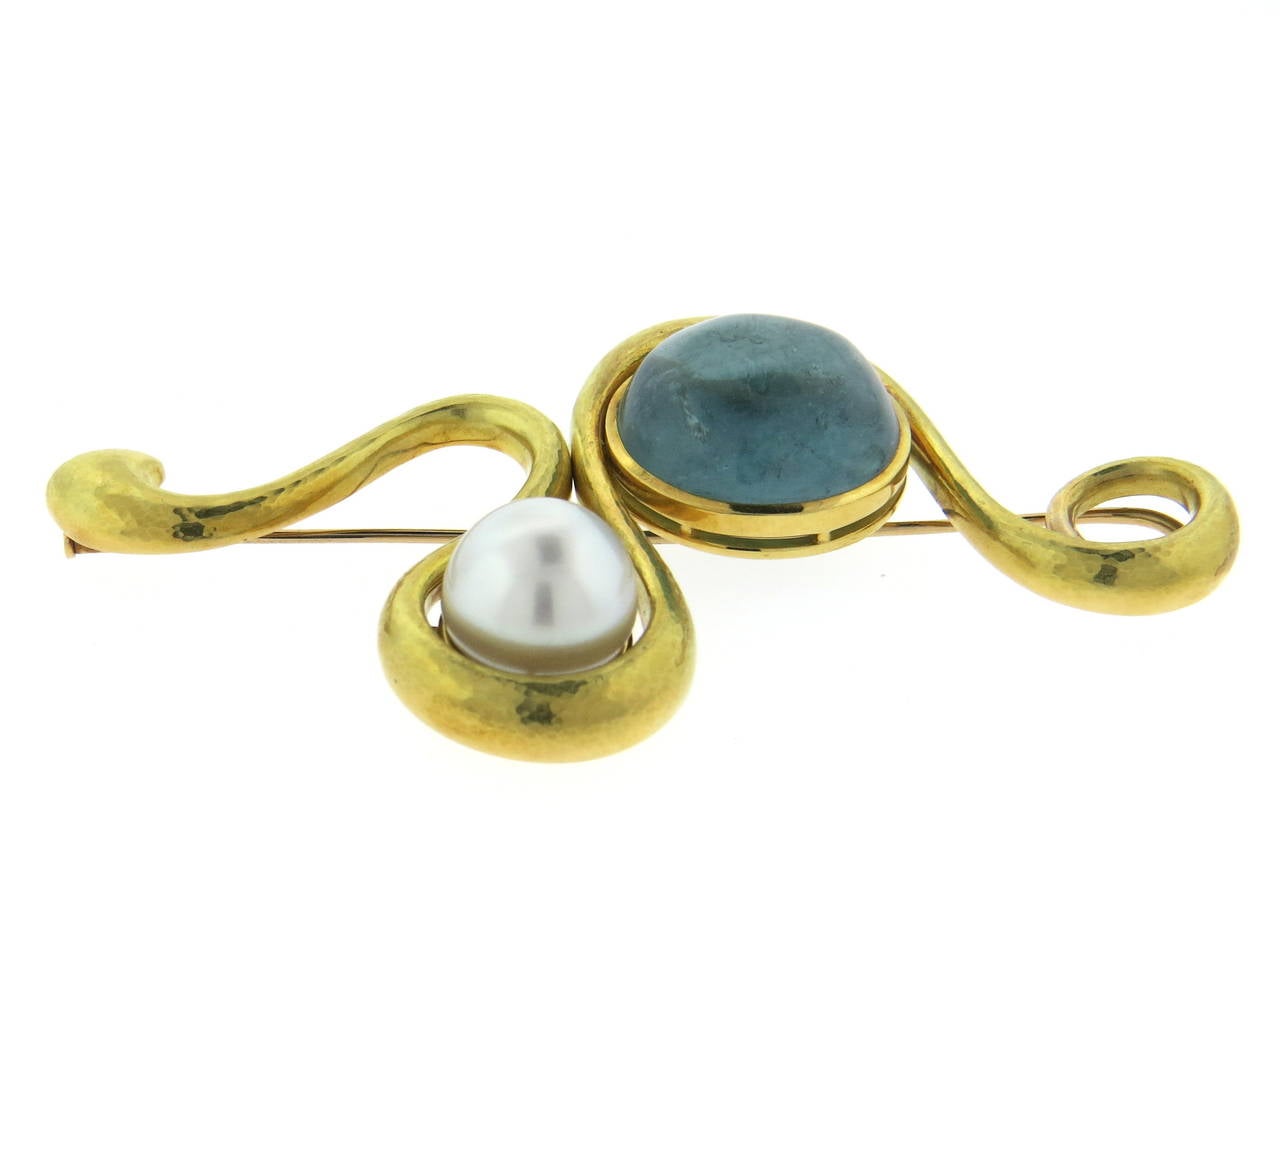 18k gold brooch pin, crafted by Leo de Vroomen, featuring 13.6mm pearl and approximately 29-30ct aquamarine cabochon, measuring 20.8mm x 18.4mm x 10.2mm. Brooch is 85mm x 44mm. Marked with English gold assay and maker's marks. Weight of the piece -